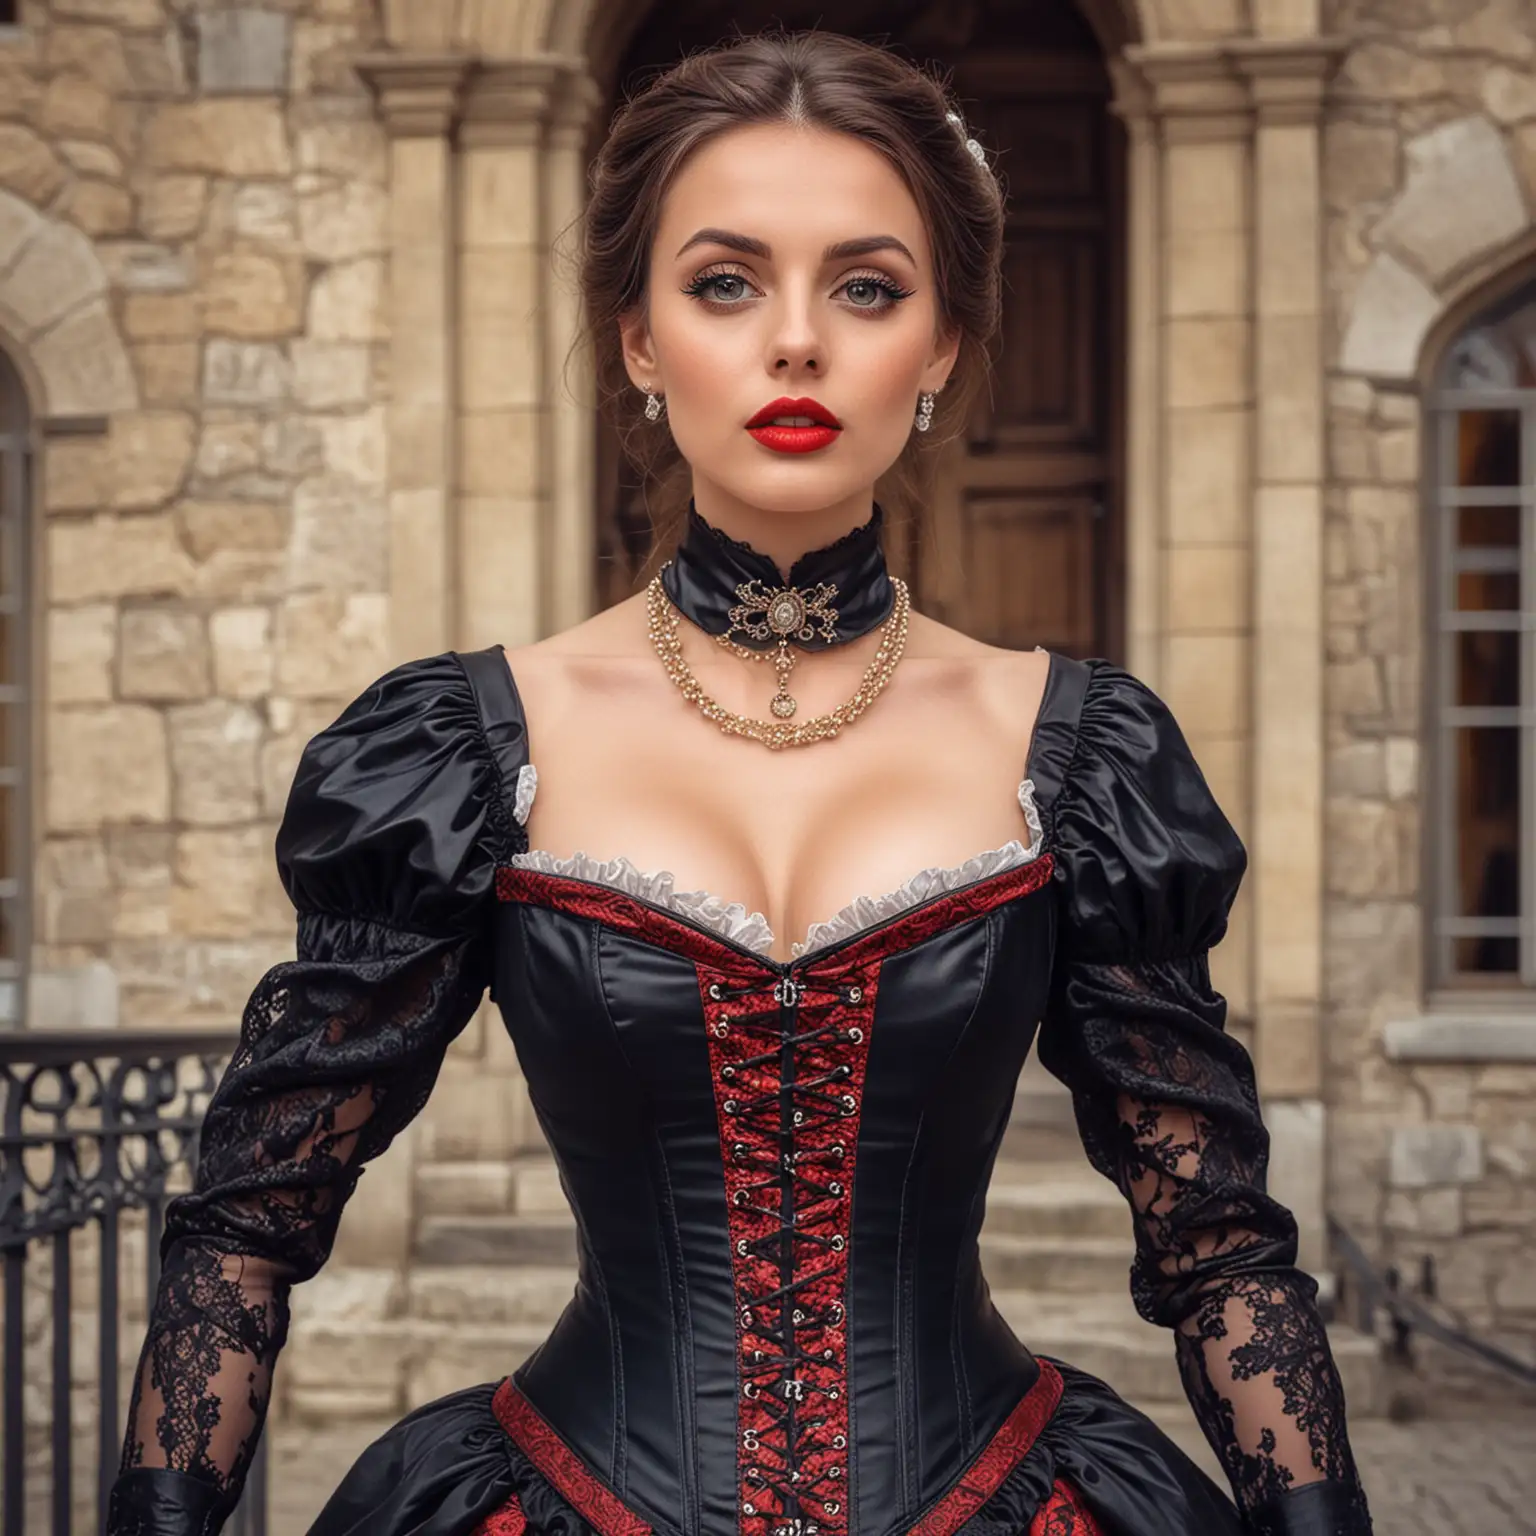 Most beautiful Switzerland lady, huge eyes, porn face, red lips, baroque dress with corset, leather collar, high heels, perfect legs, perfect hands and fingers, royal Switzerland castle background